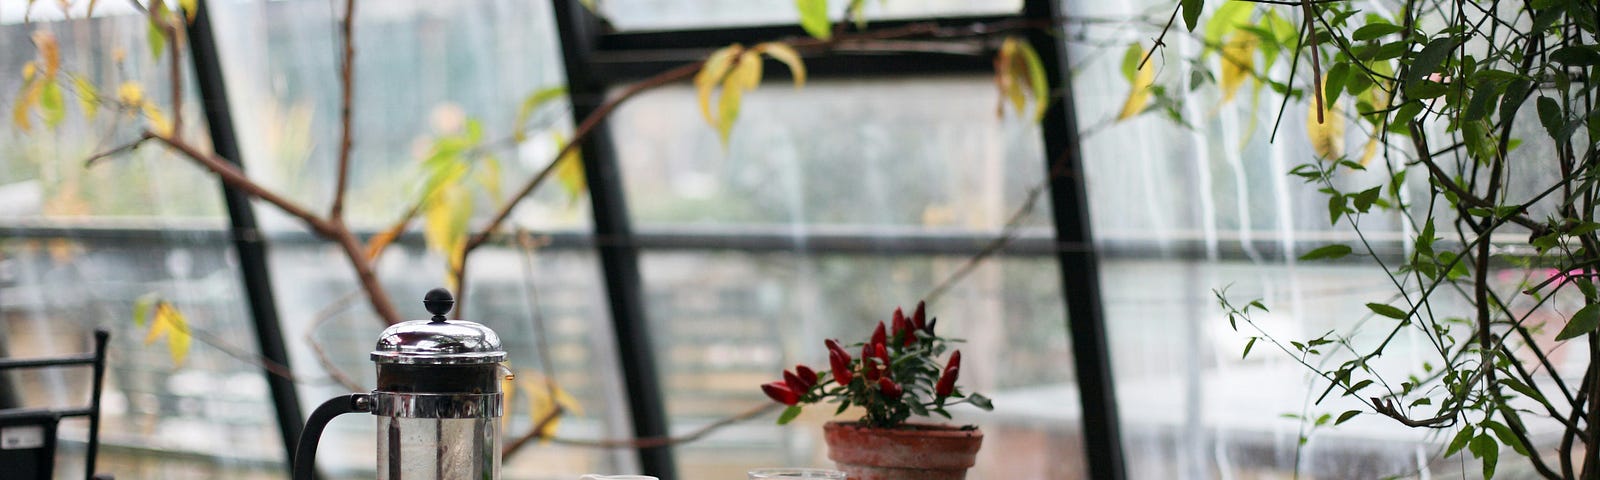 A table in the window of a coffee shop. A plant, coffee pot, and cup sit on the table.